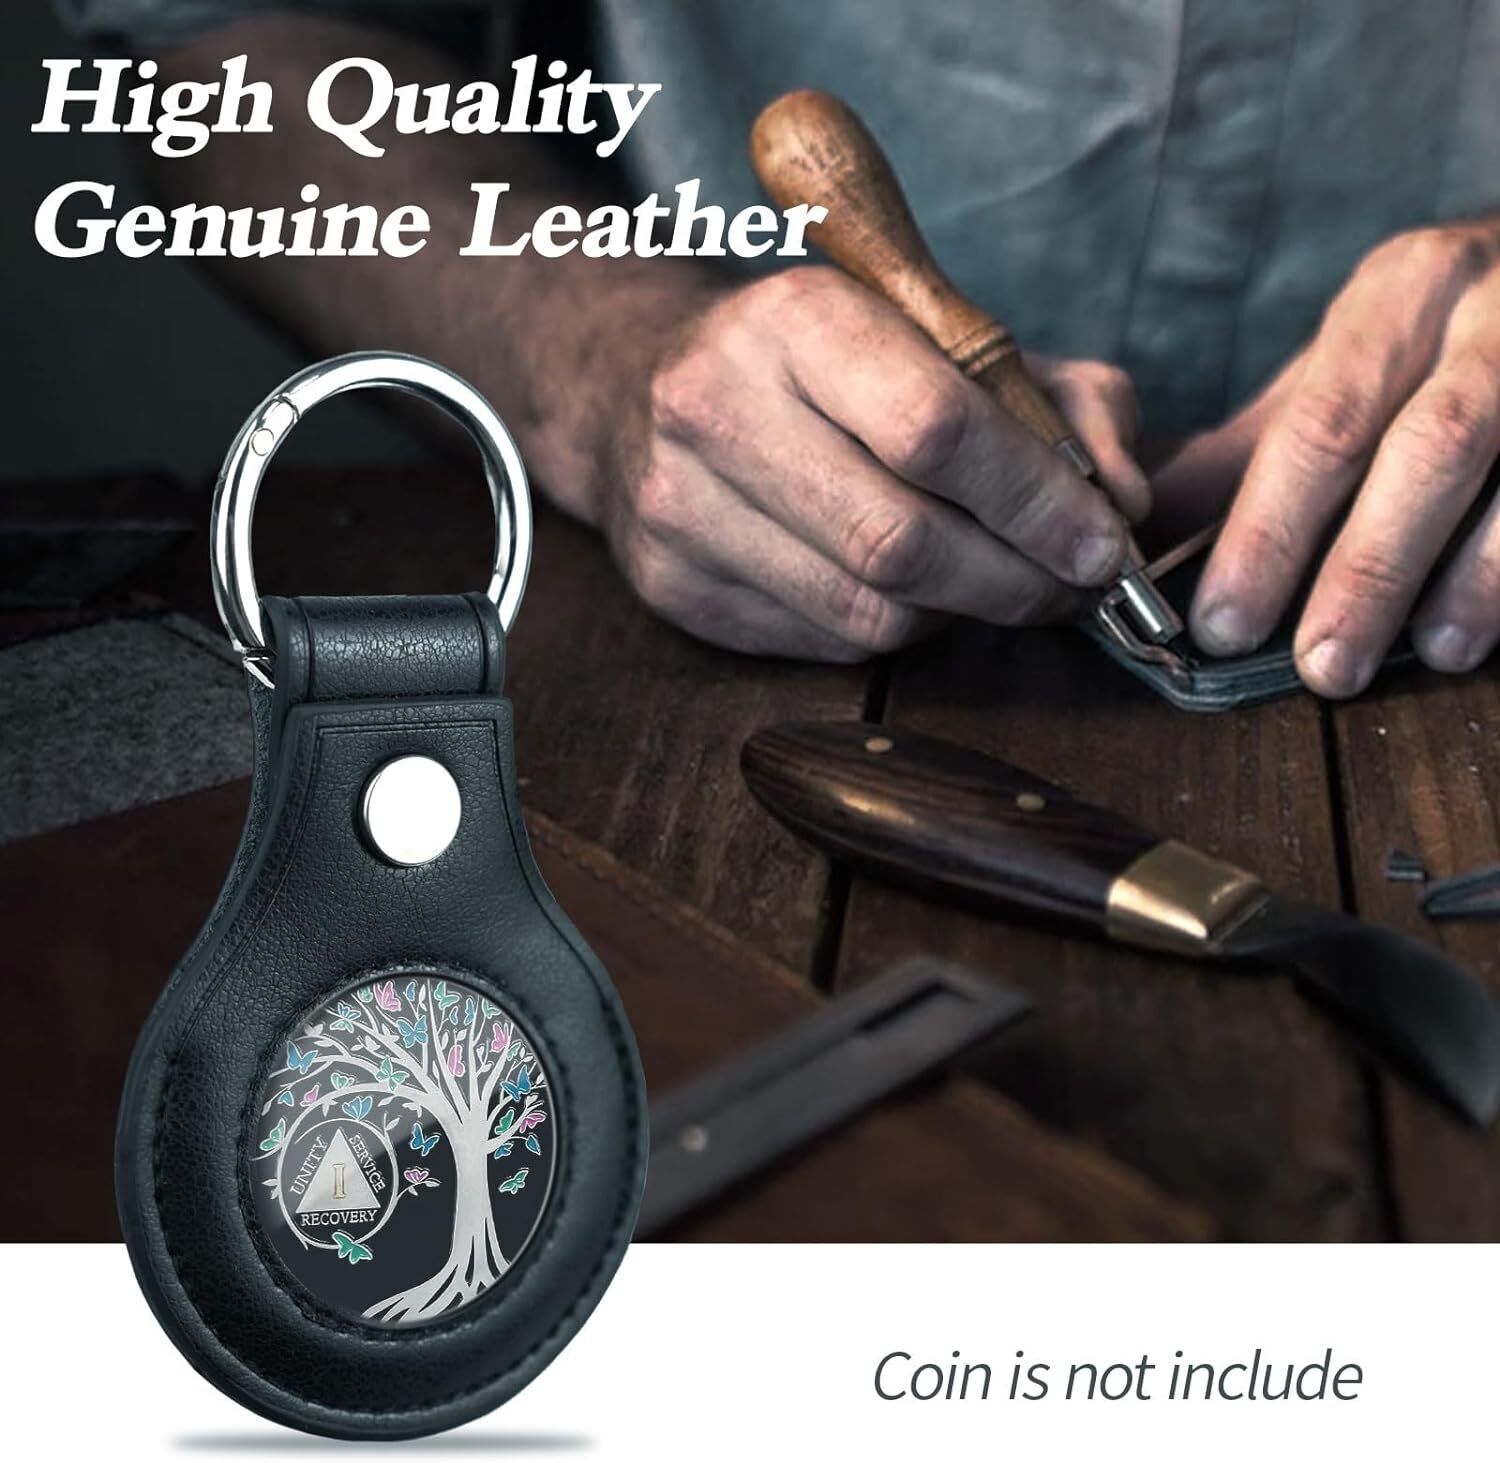 Genuine Leather Coin Holder Keychain for AA  Chip with Double Sides Display